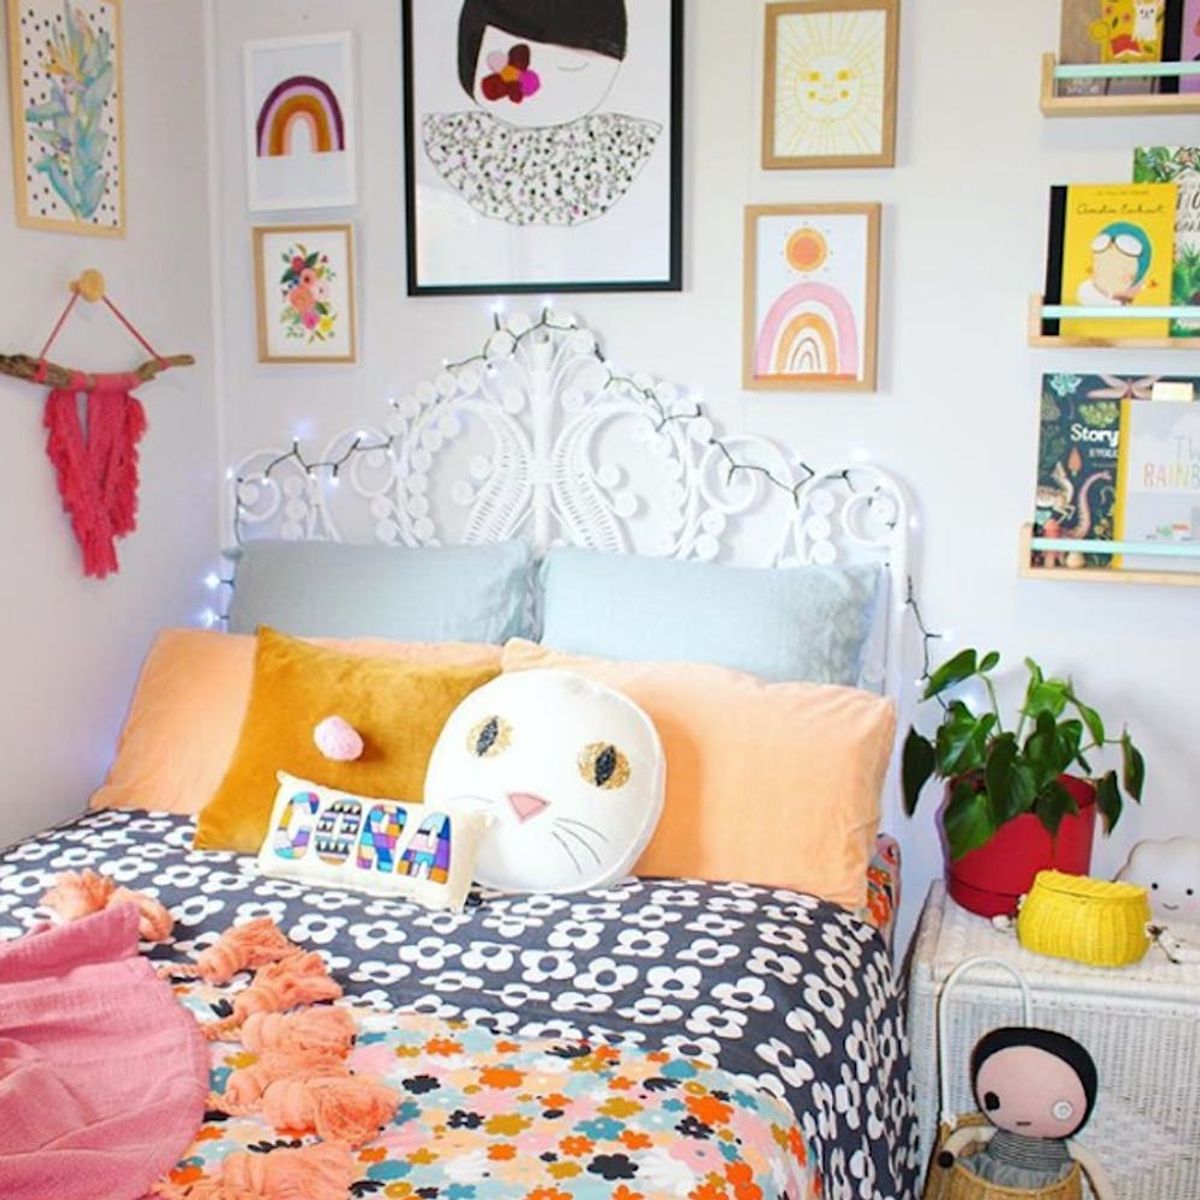 These Maximalist Bedrooms Will Inspire You to Add Color to Your Space